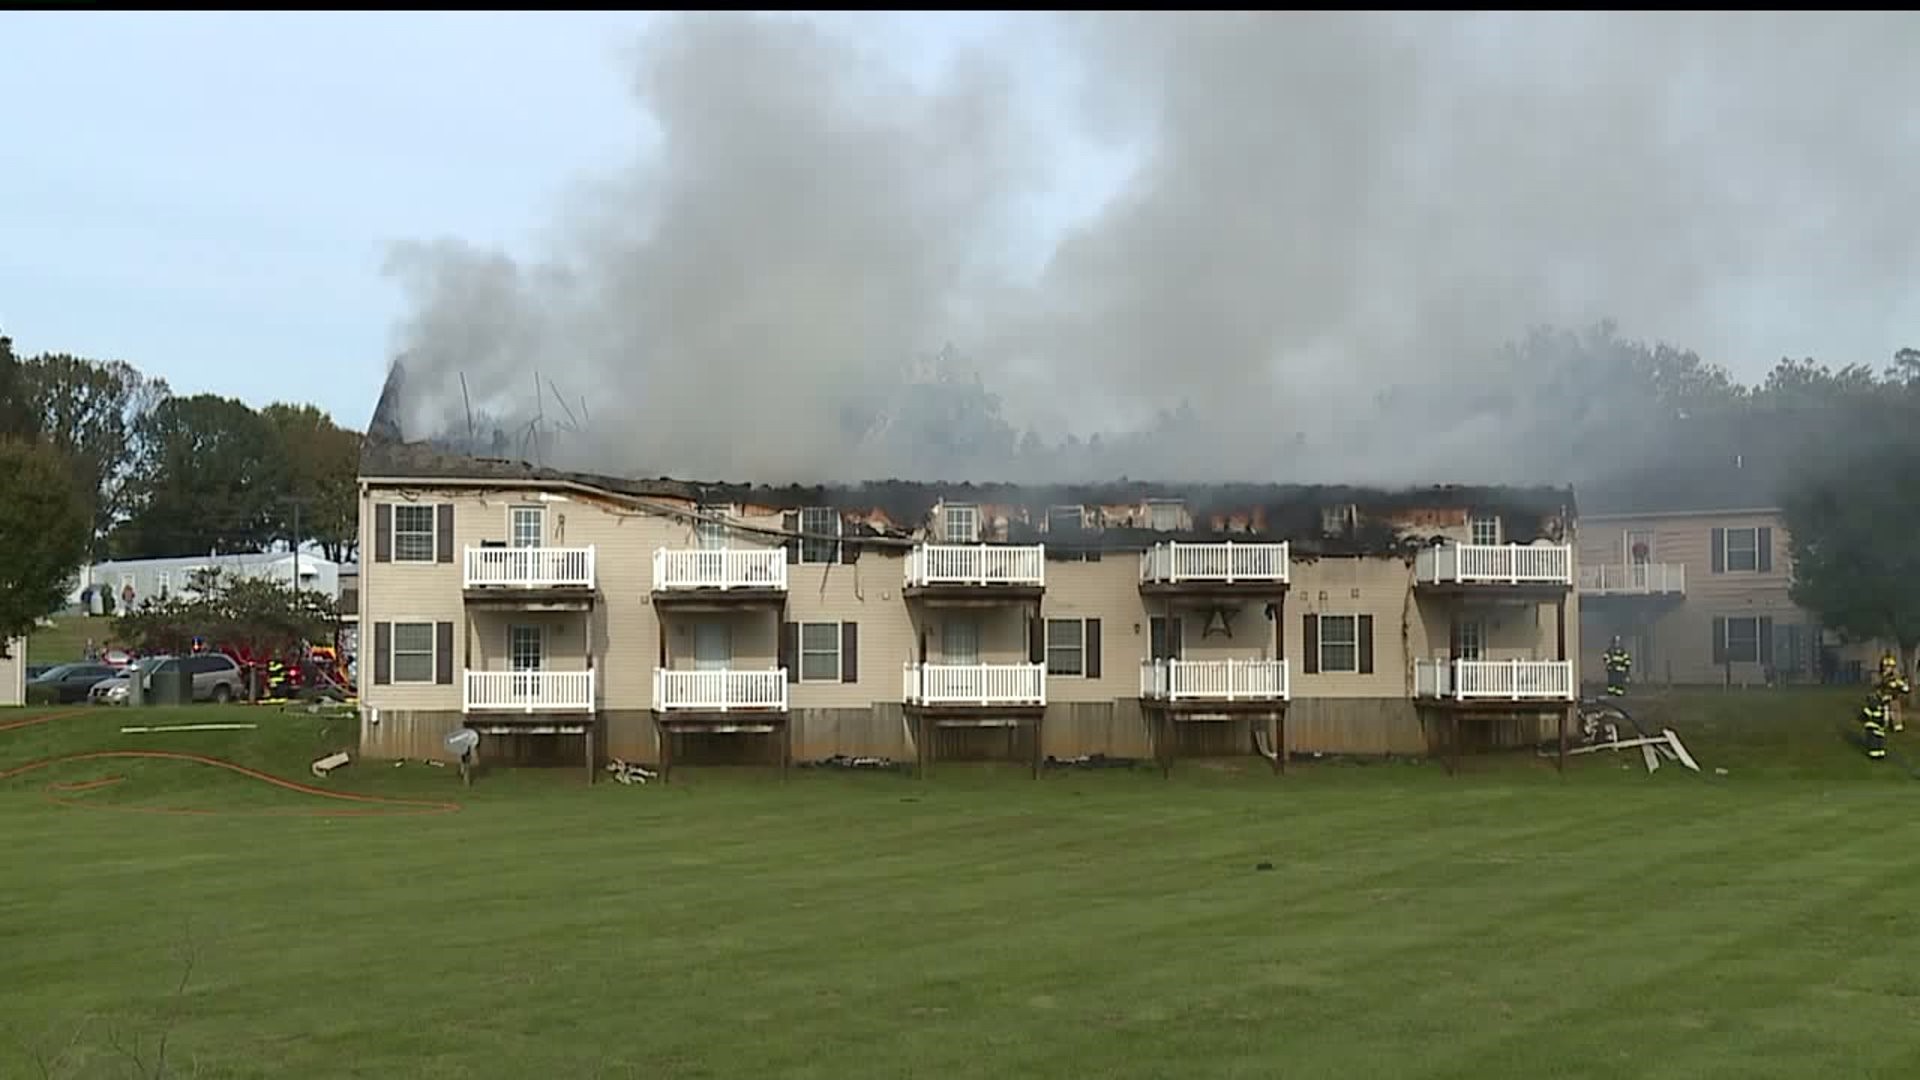 At least 14 displaced after Lancaster County apartment fire